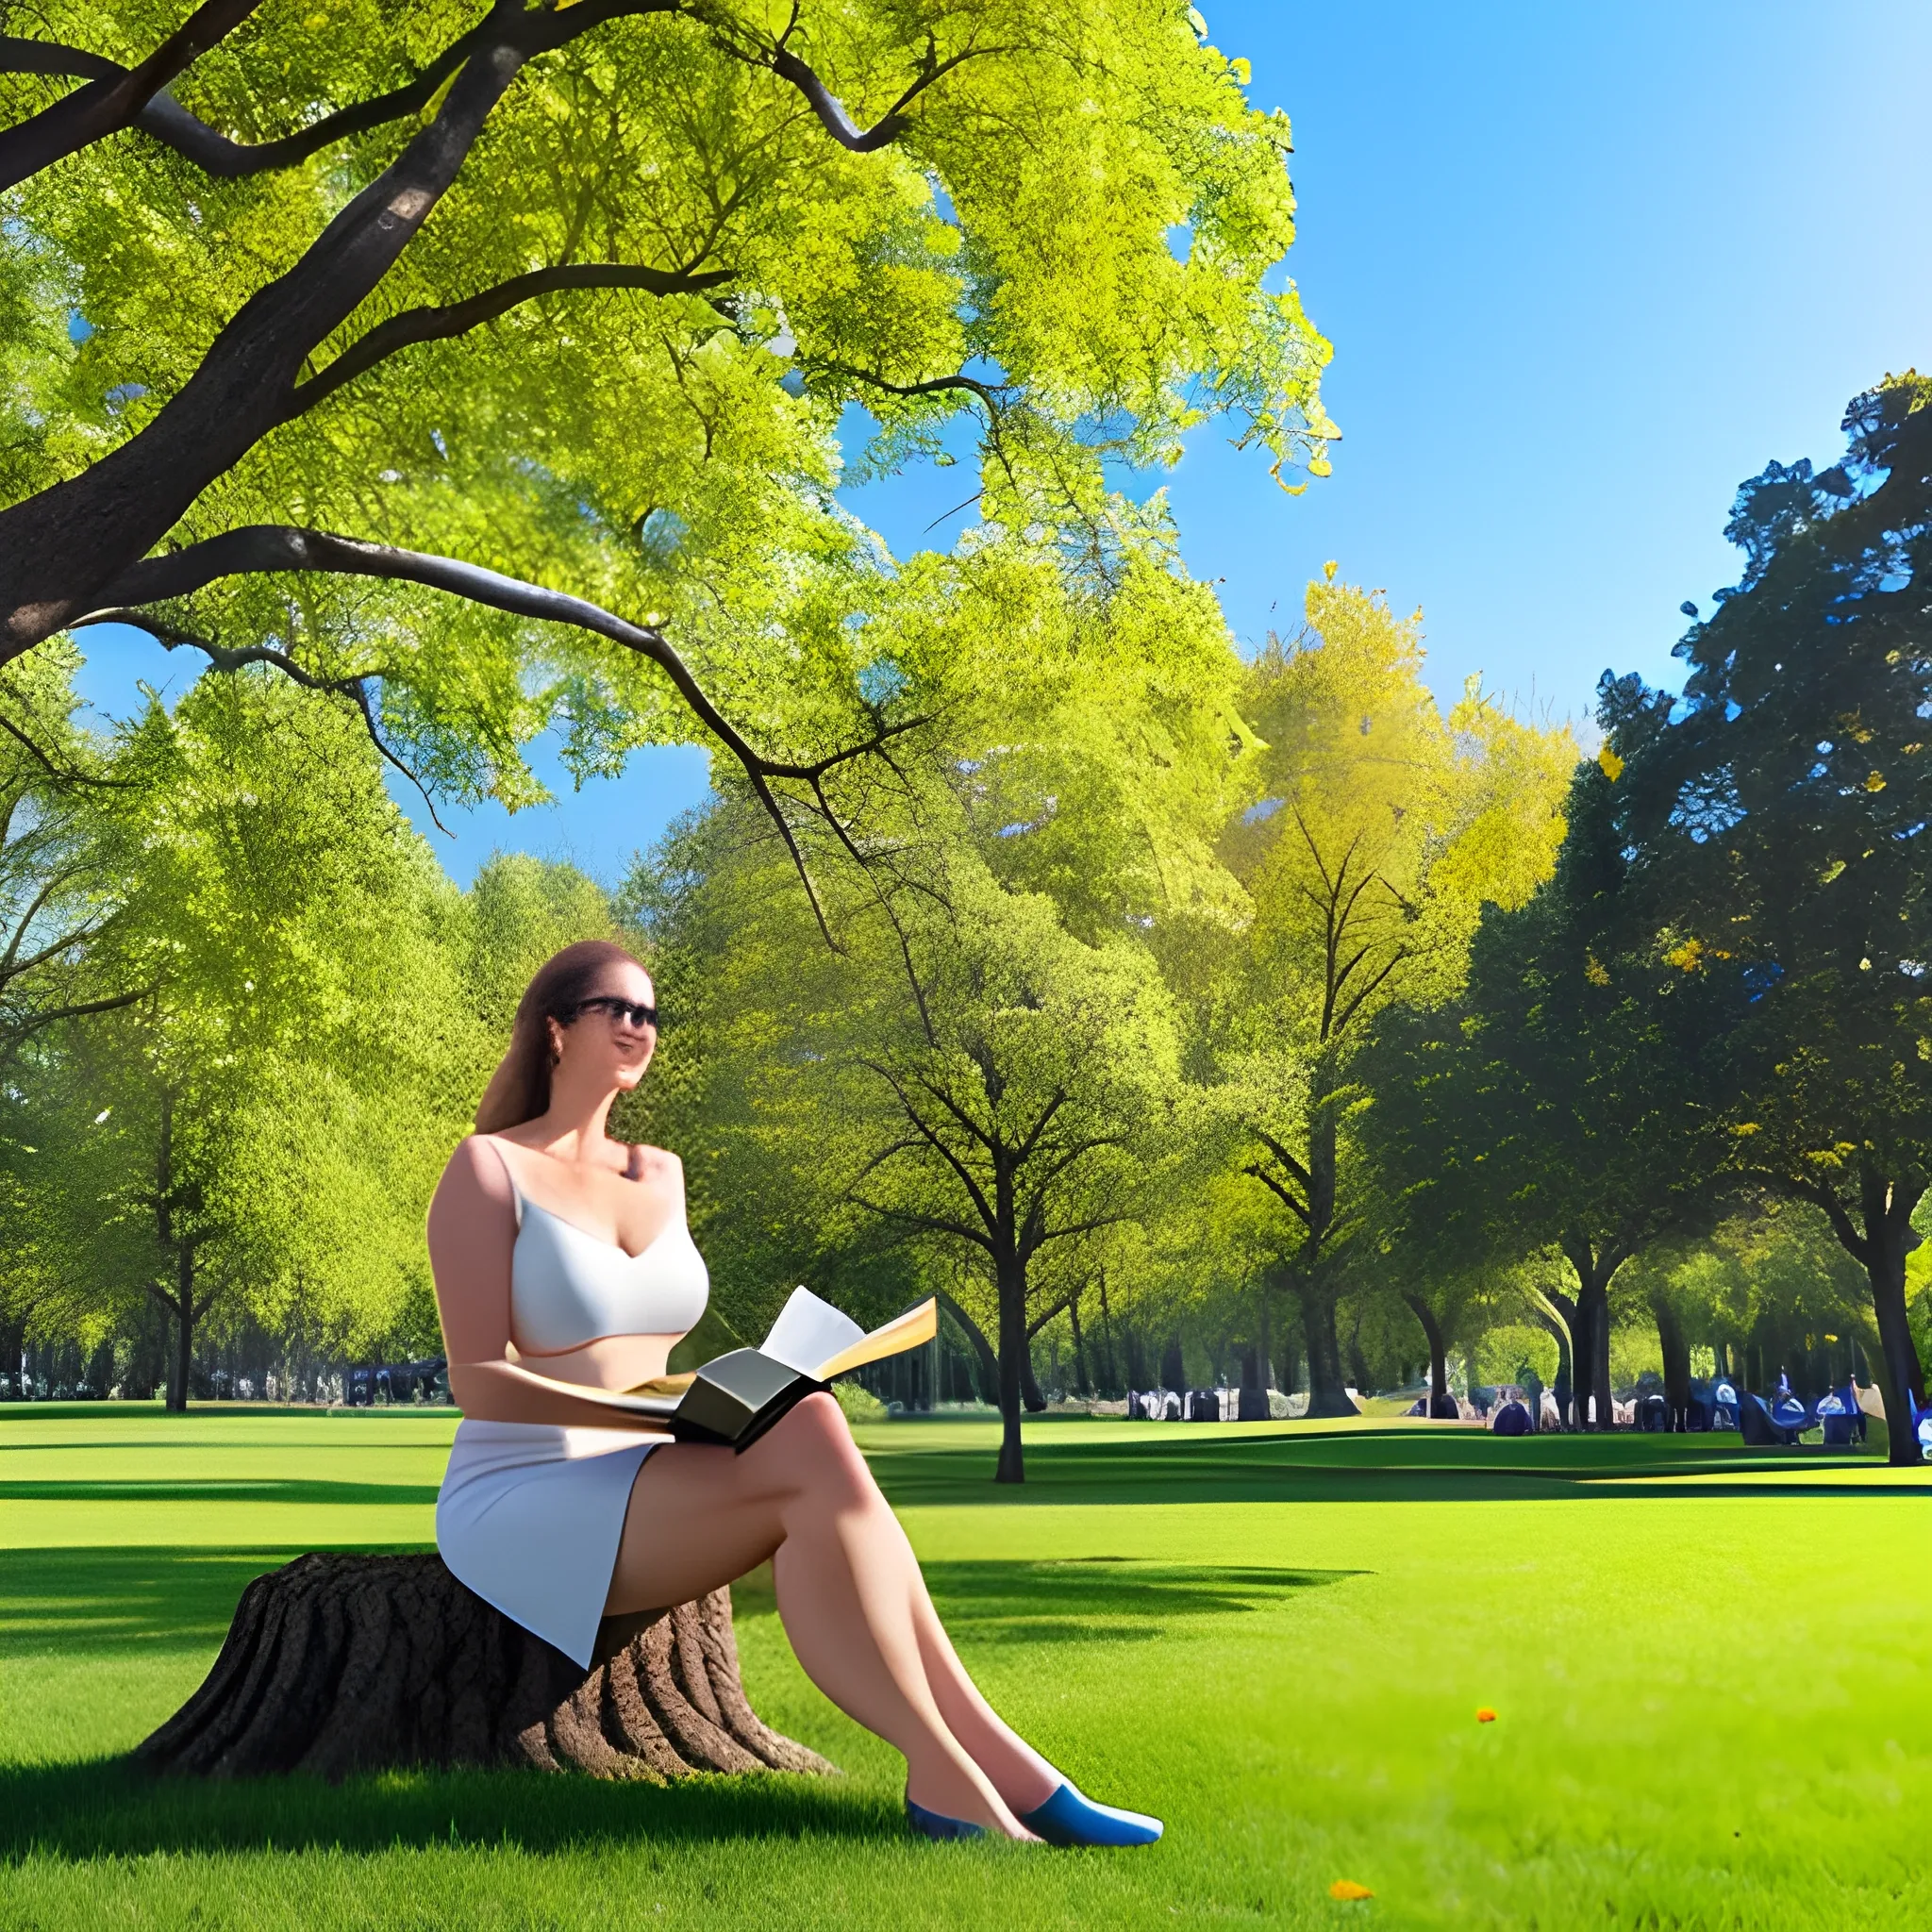 beautiful conservative girl sitting at the base of a tree and reading a book in the park on a sunny day, full body photography